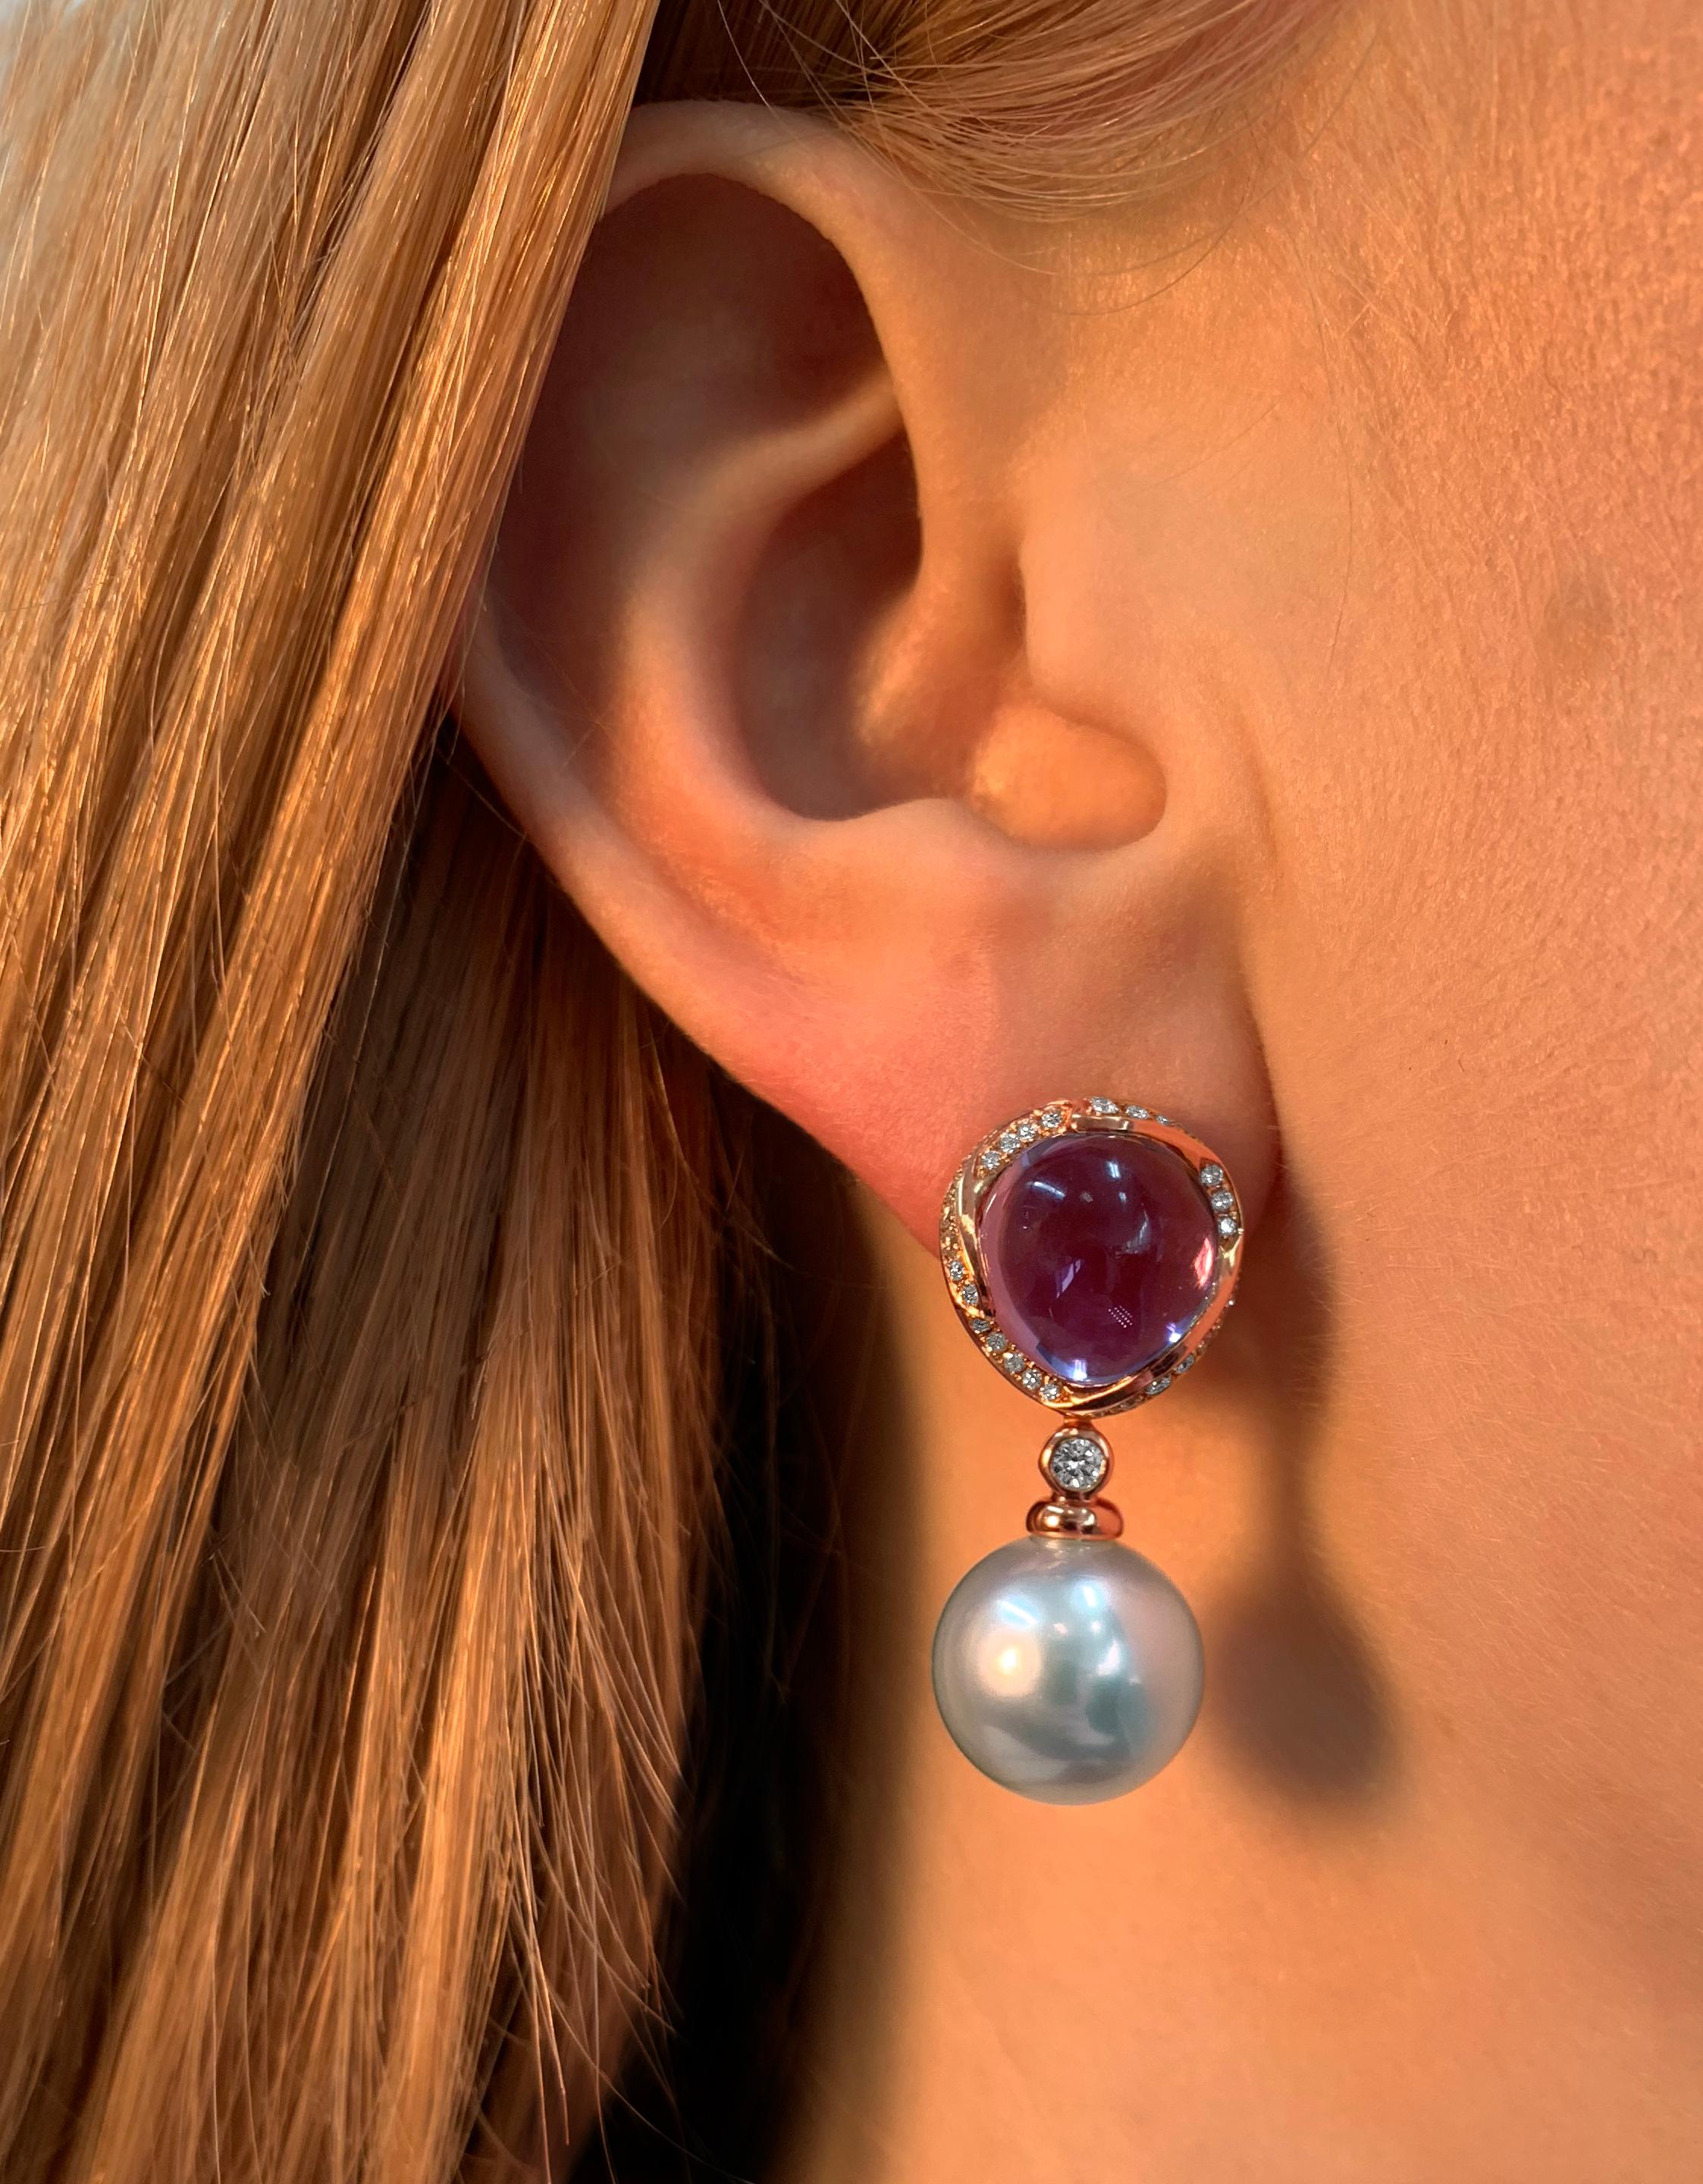 These elegant earrings by Yoko London feature lustrous South Sea pearls beneath mesmerising cabochon cut amethysts. Set in 18 Karat yellow gold to enrich the vibrant hues of the amethyst, these captivating earrings add a sumptuous touch of colour to